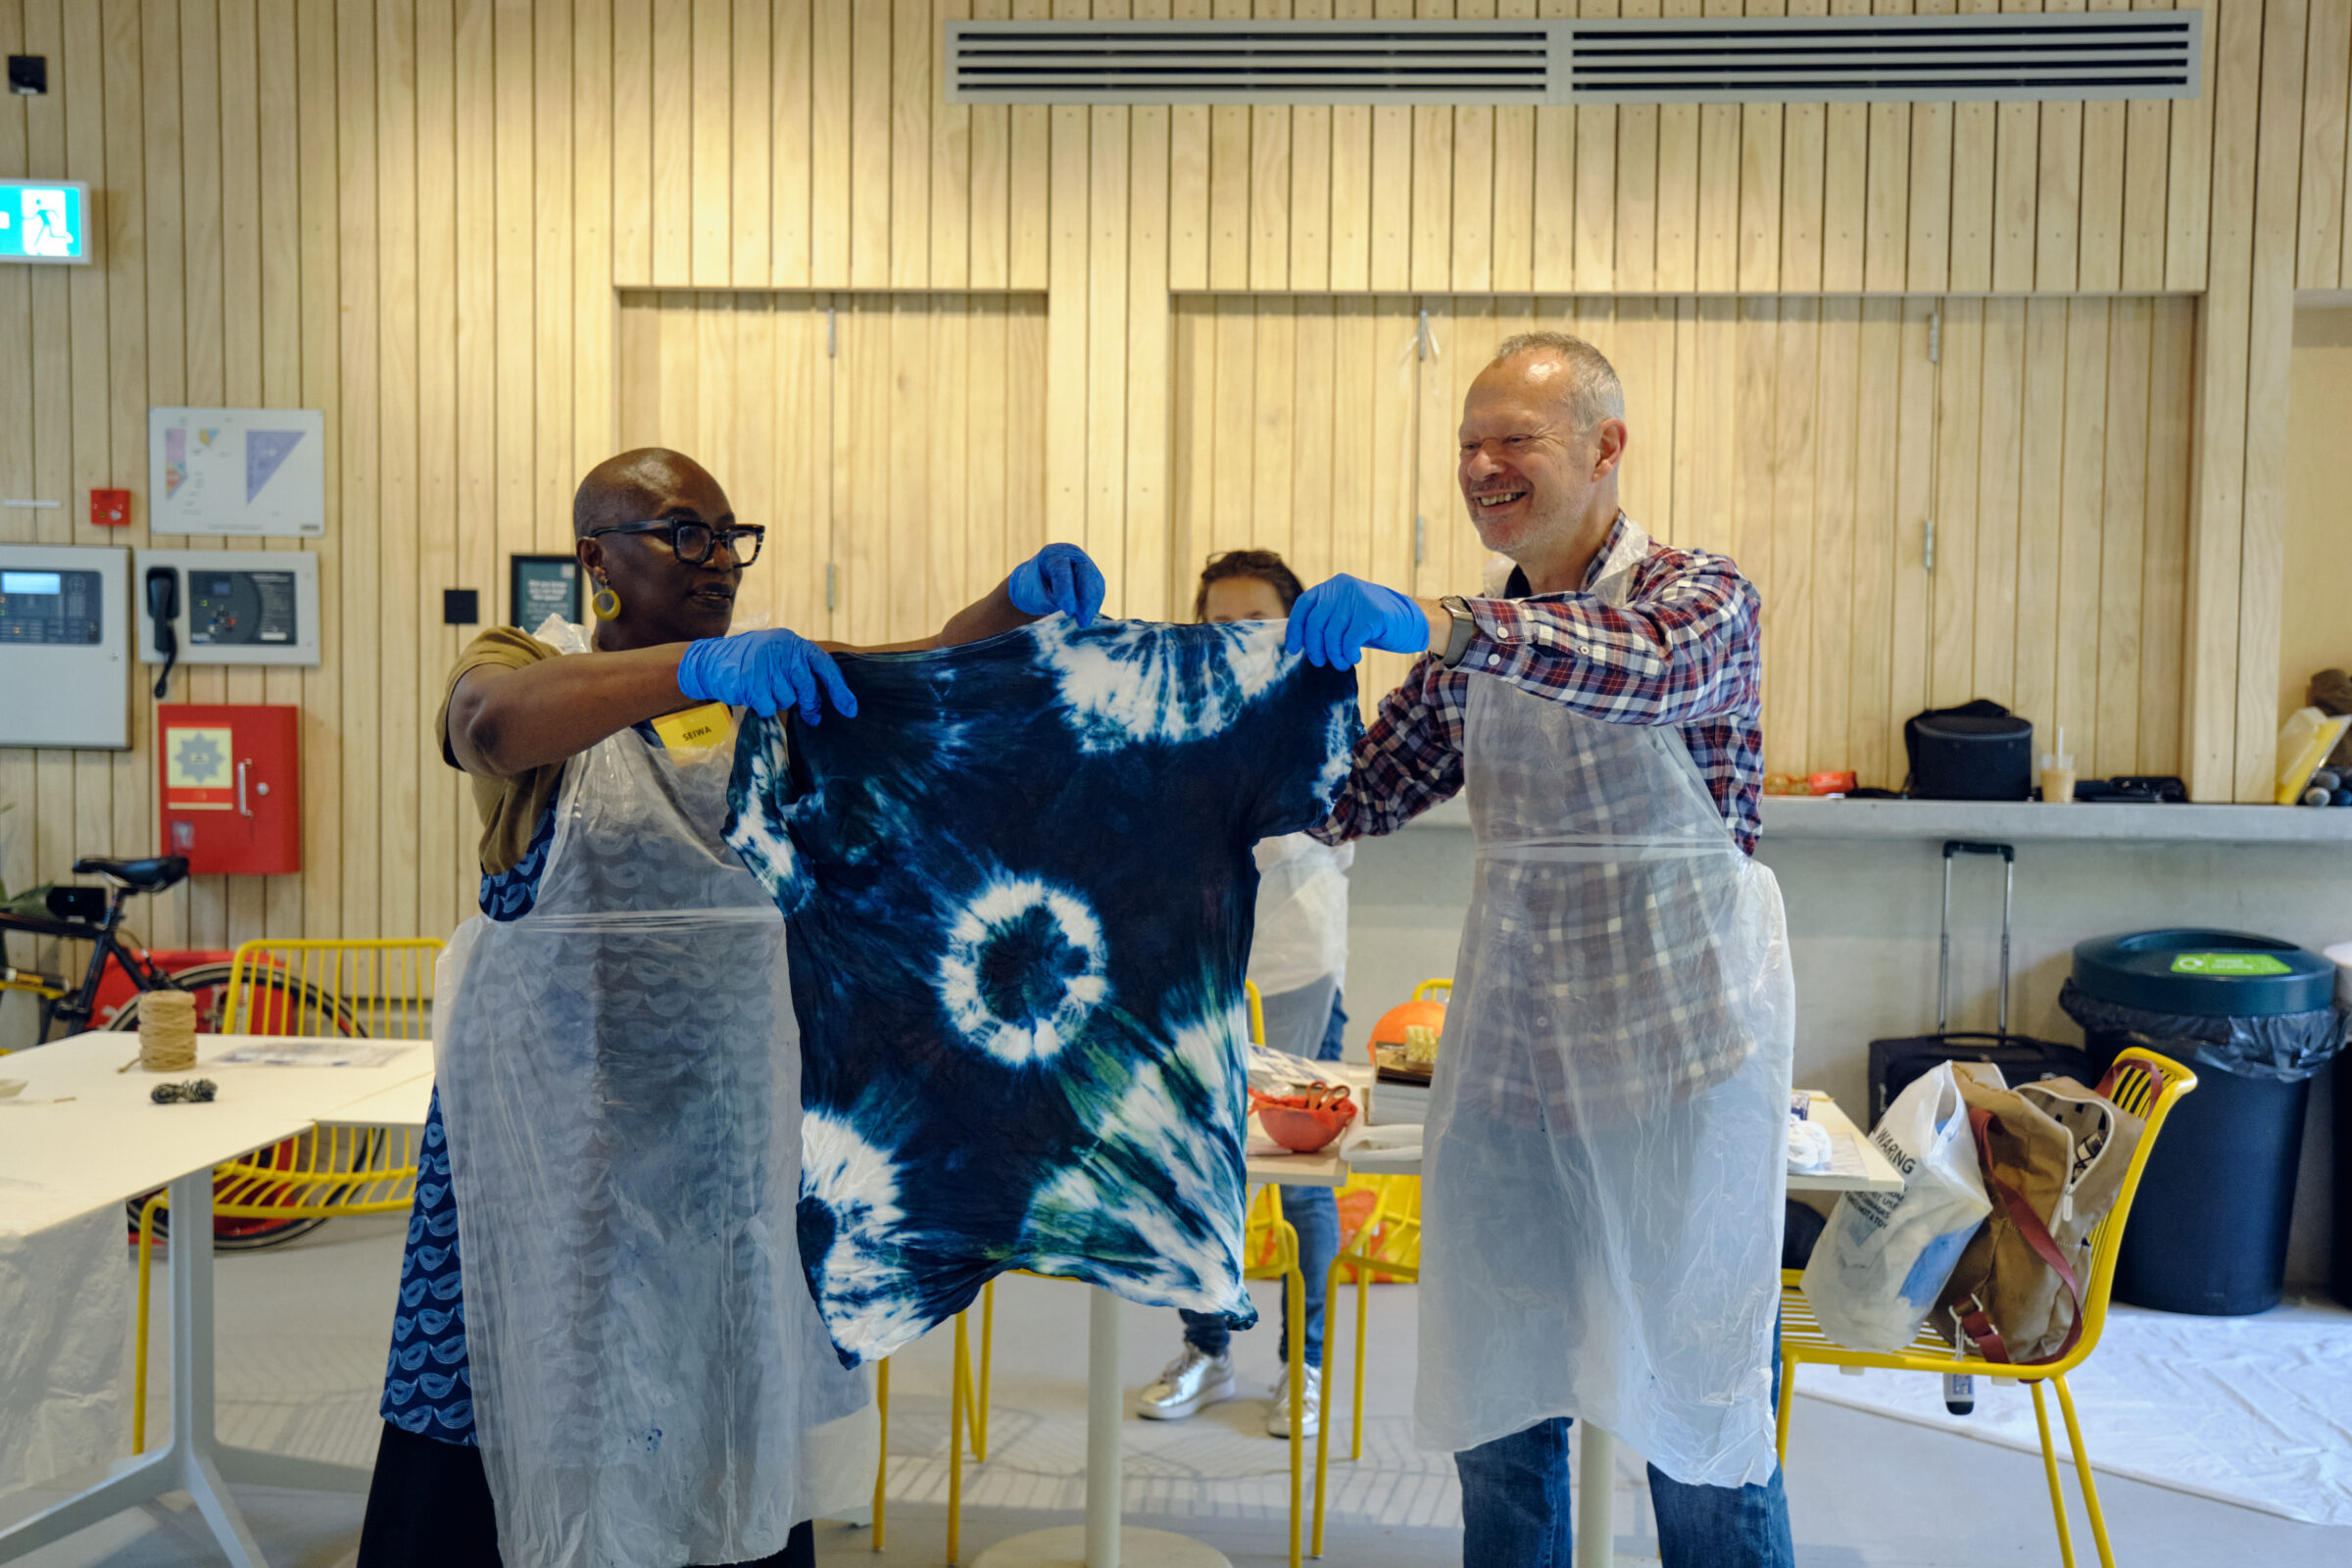 A man and a woman in white aprons are holding between them a t-shirt tie-dyed with indigo and white circular patterns. They are both smiling.